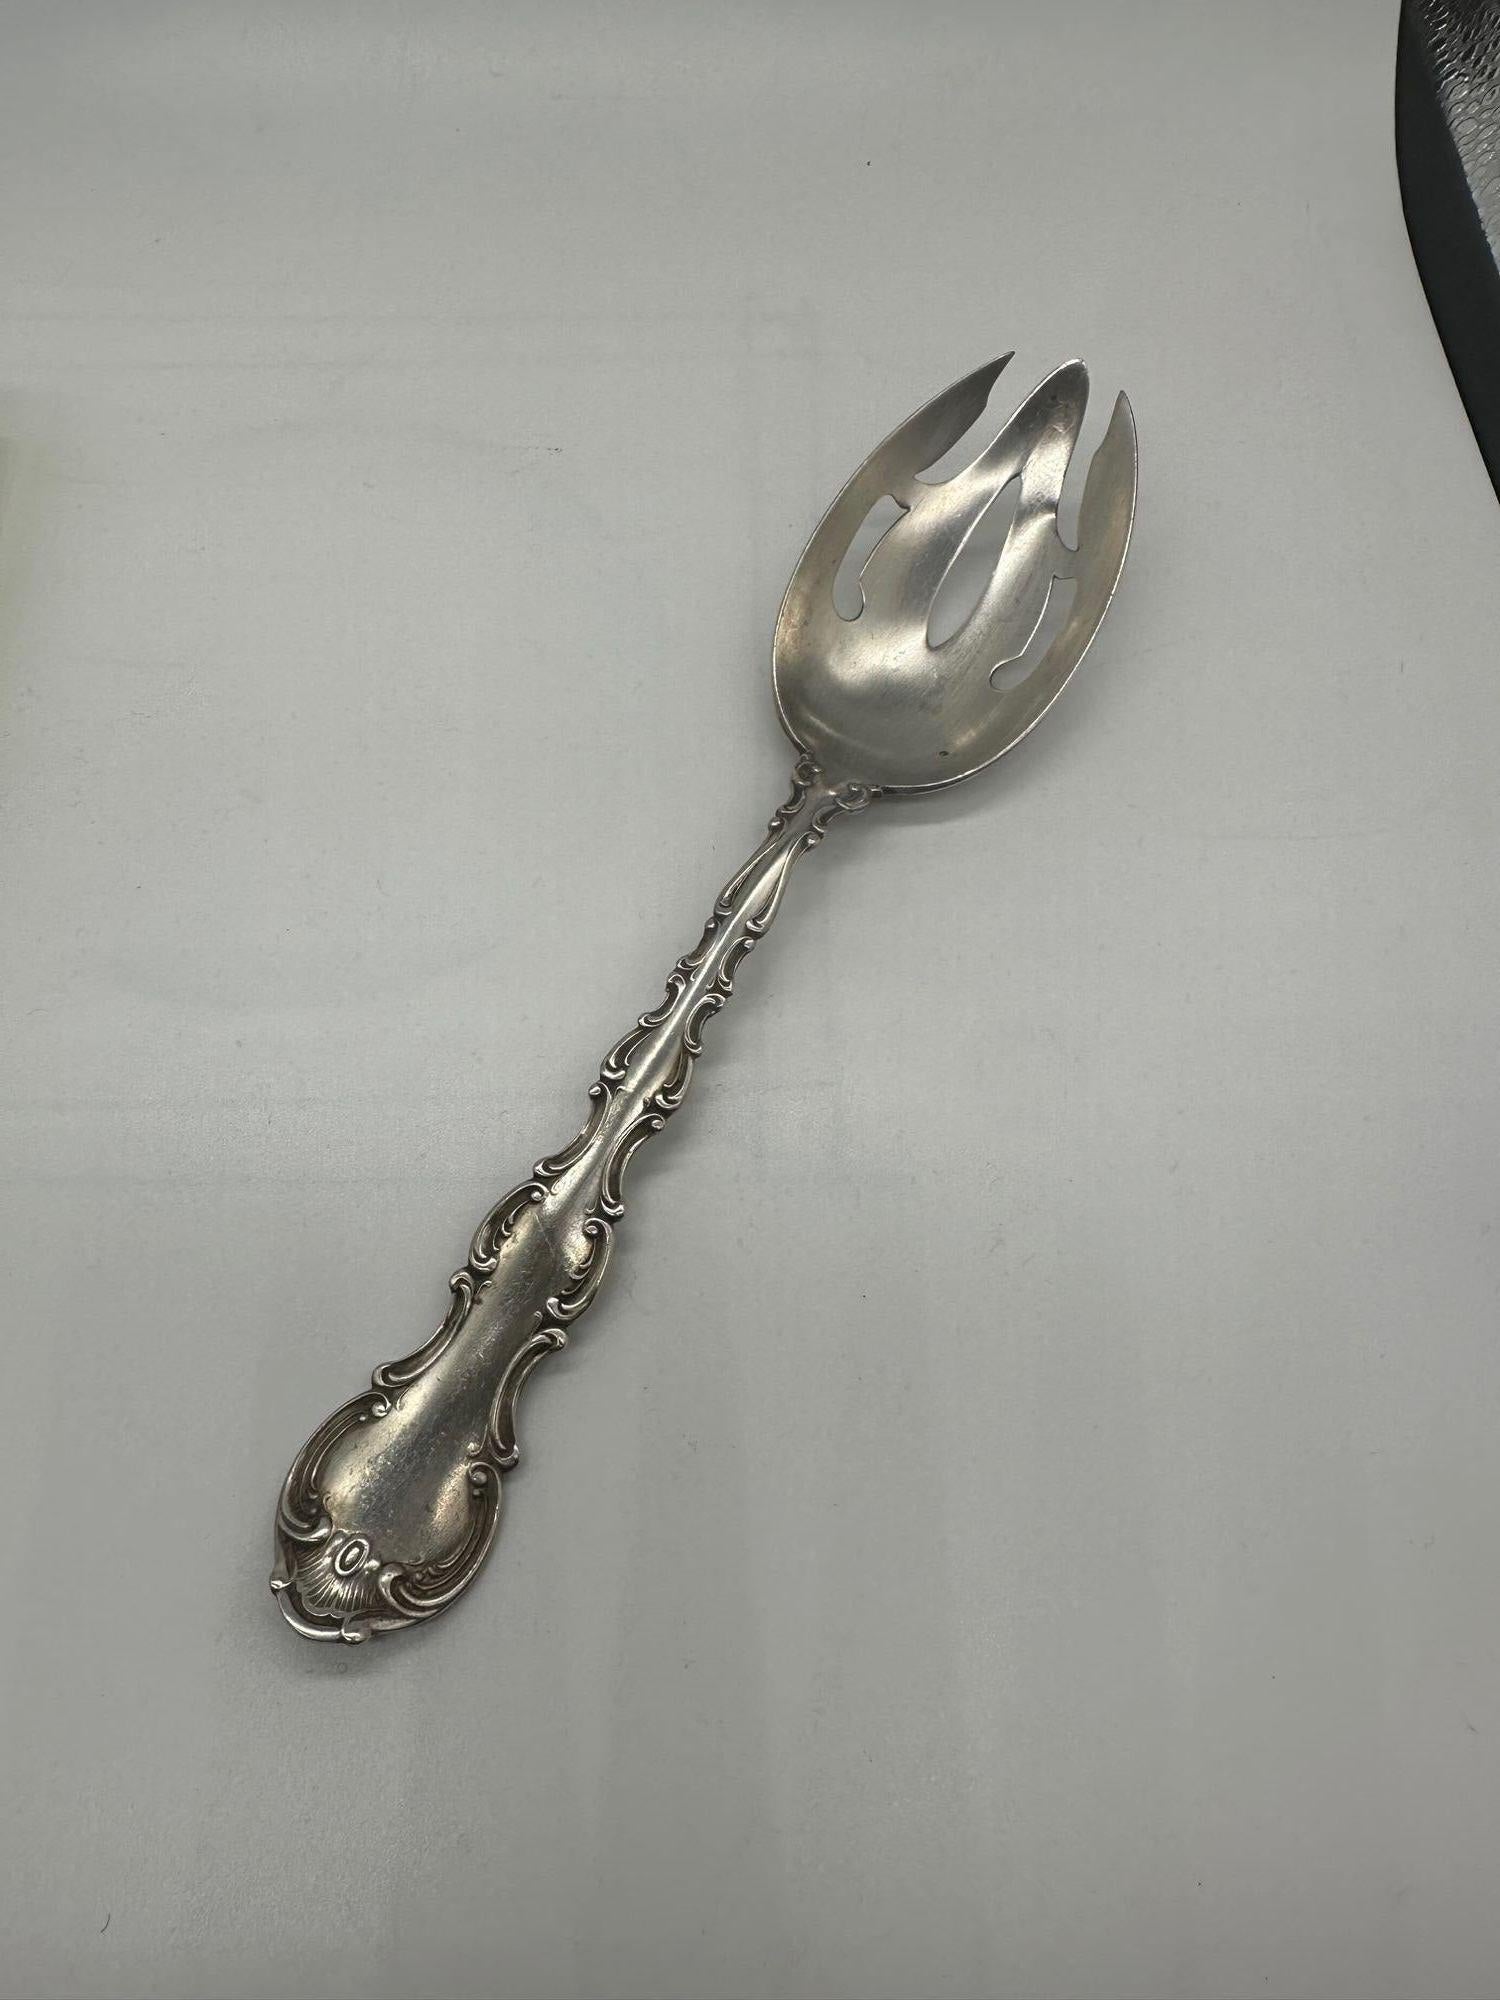 North American Strasbourg Gorham Sterling Silver Serving Spoon w/ Pierced Bowl & Tines For Sale